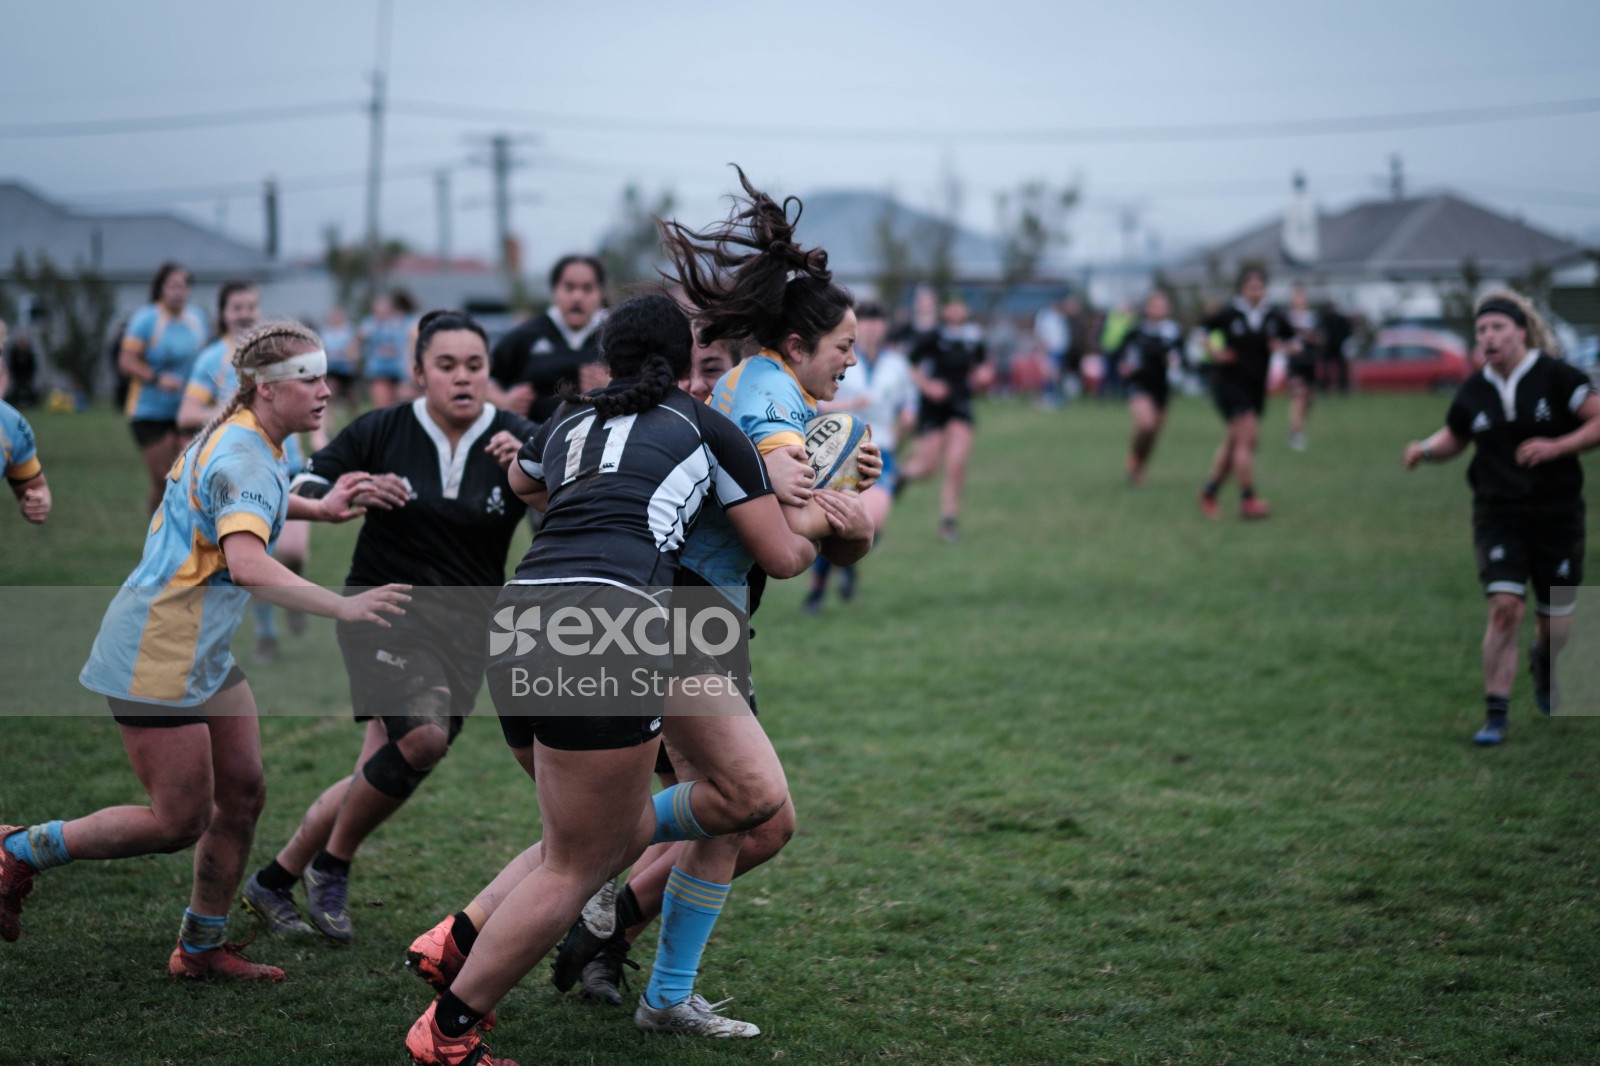 Women's rugby sports action shot